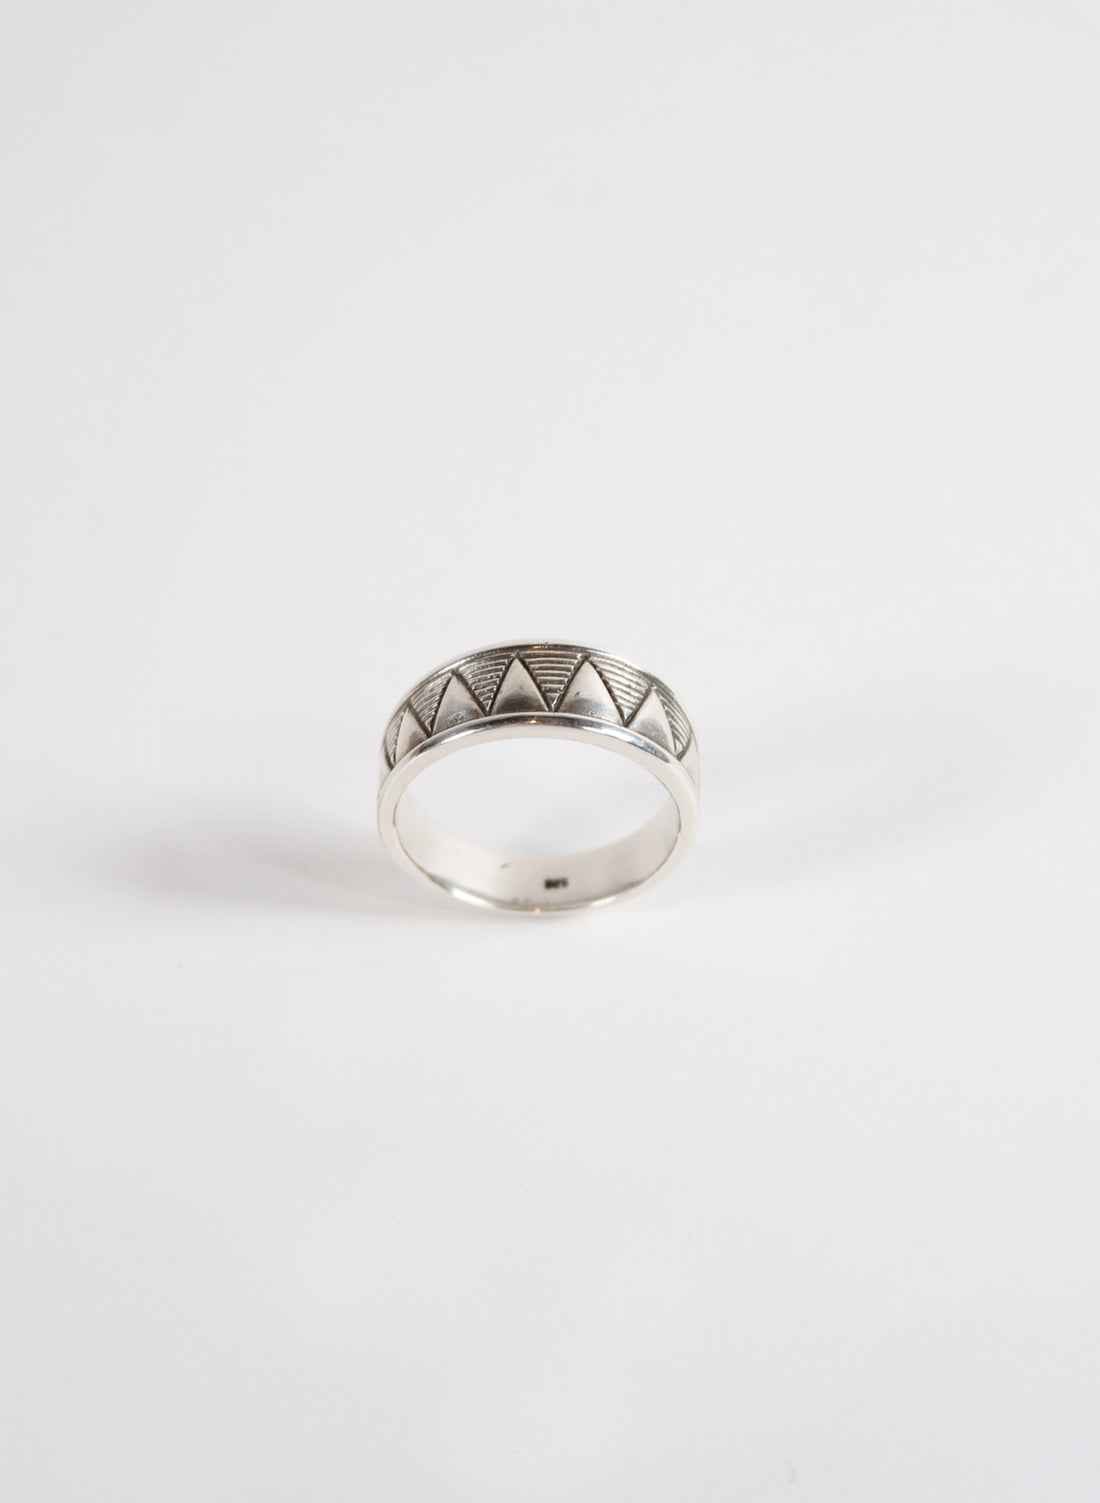 Maunga Ring - Sterling Silver